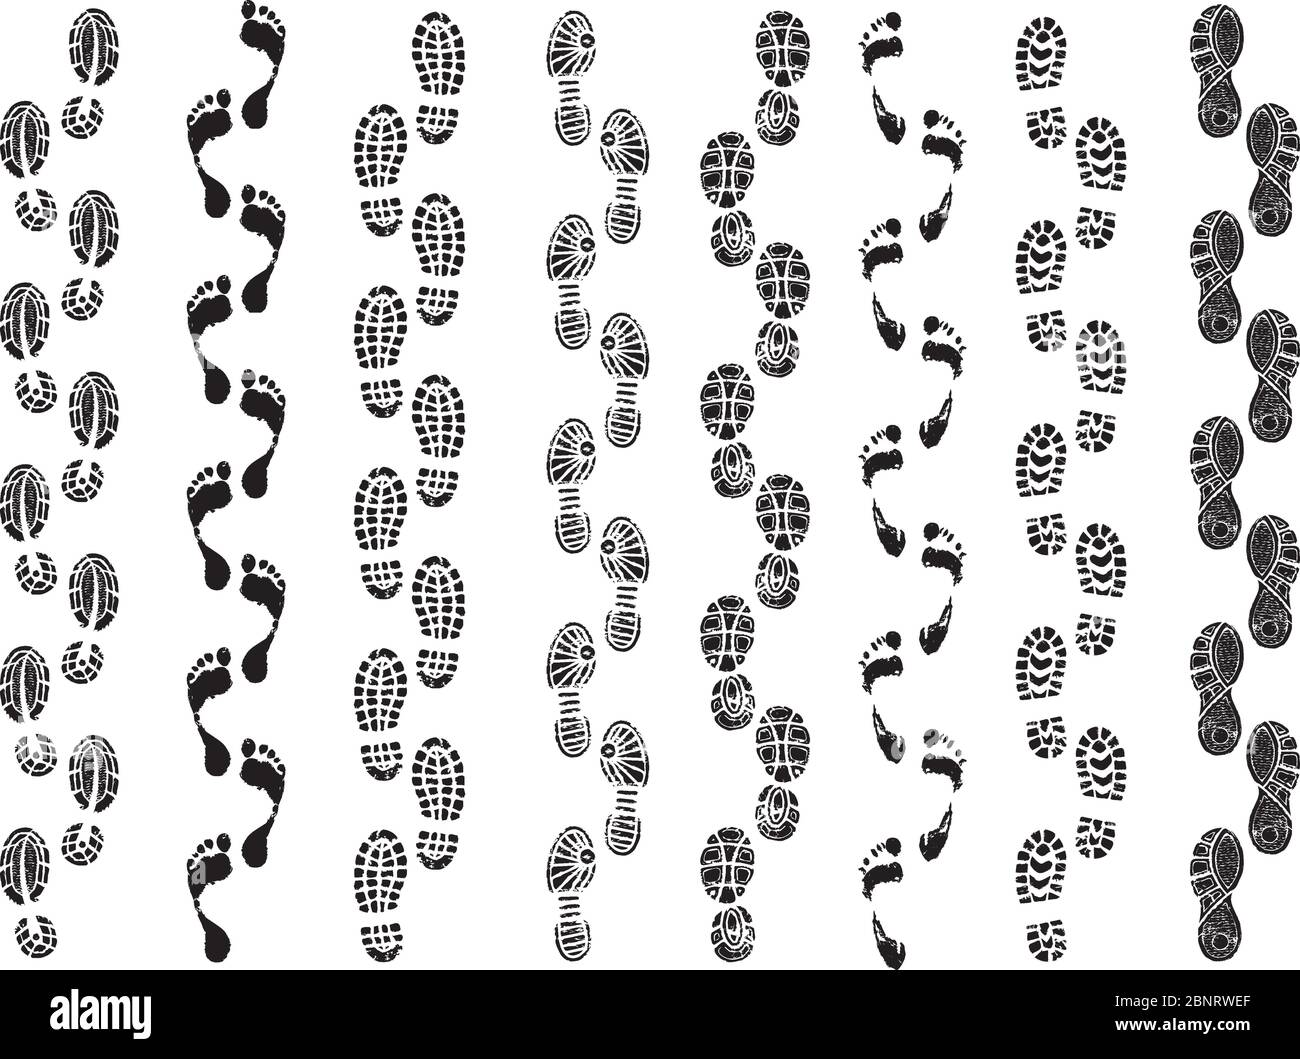 Footprints shapes. Movement direction of human shoes boots walking footprints vector silhouettes Stock Vector